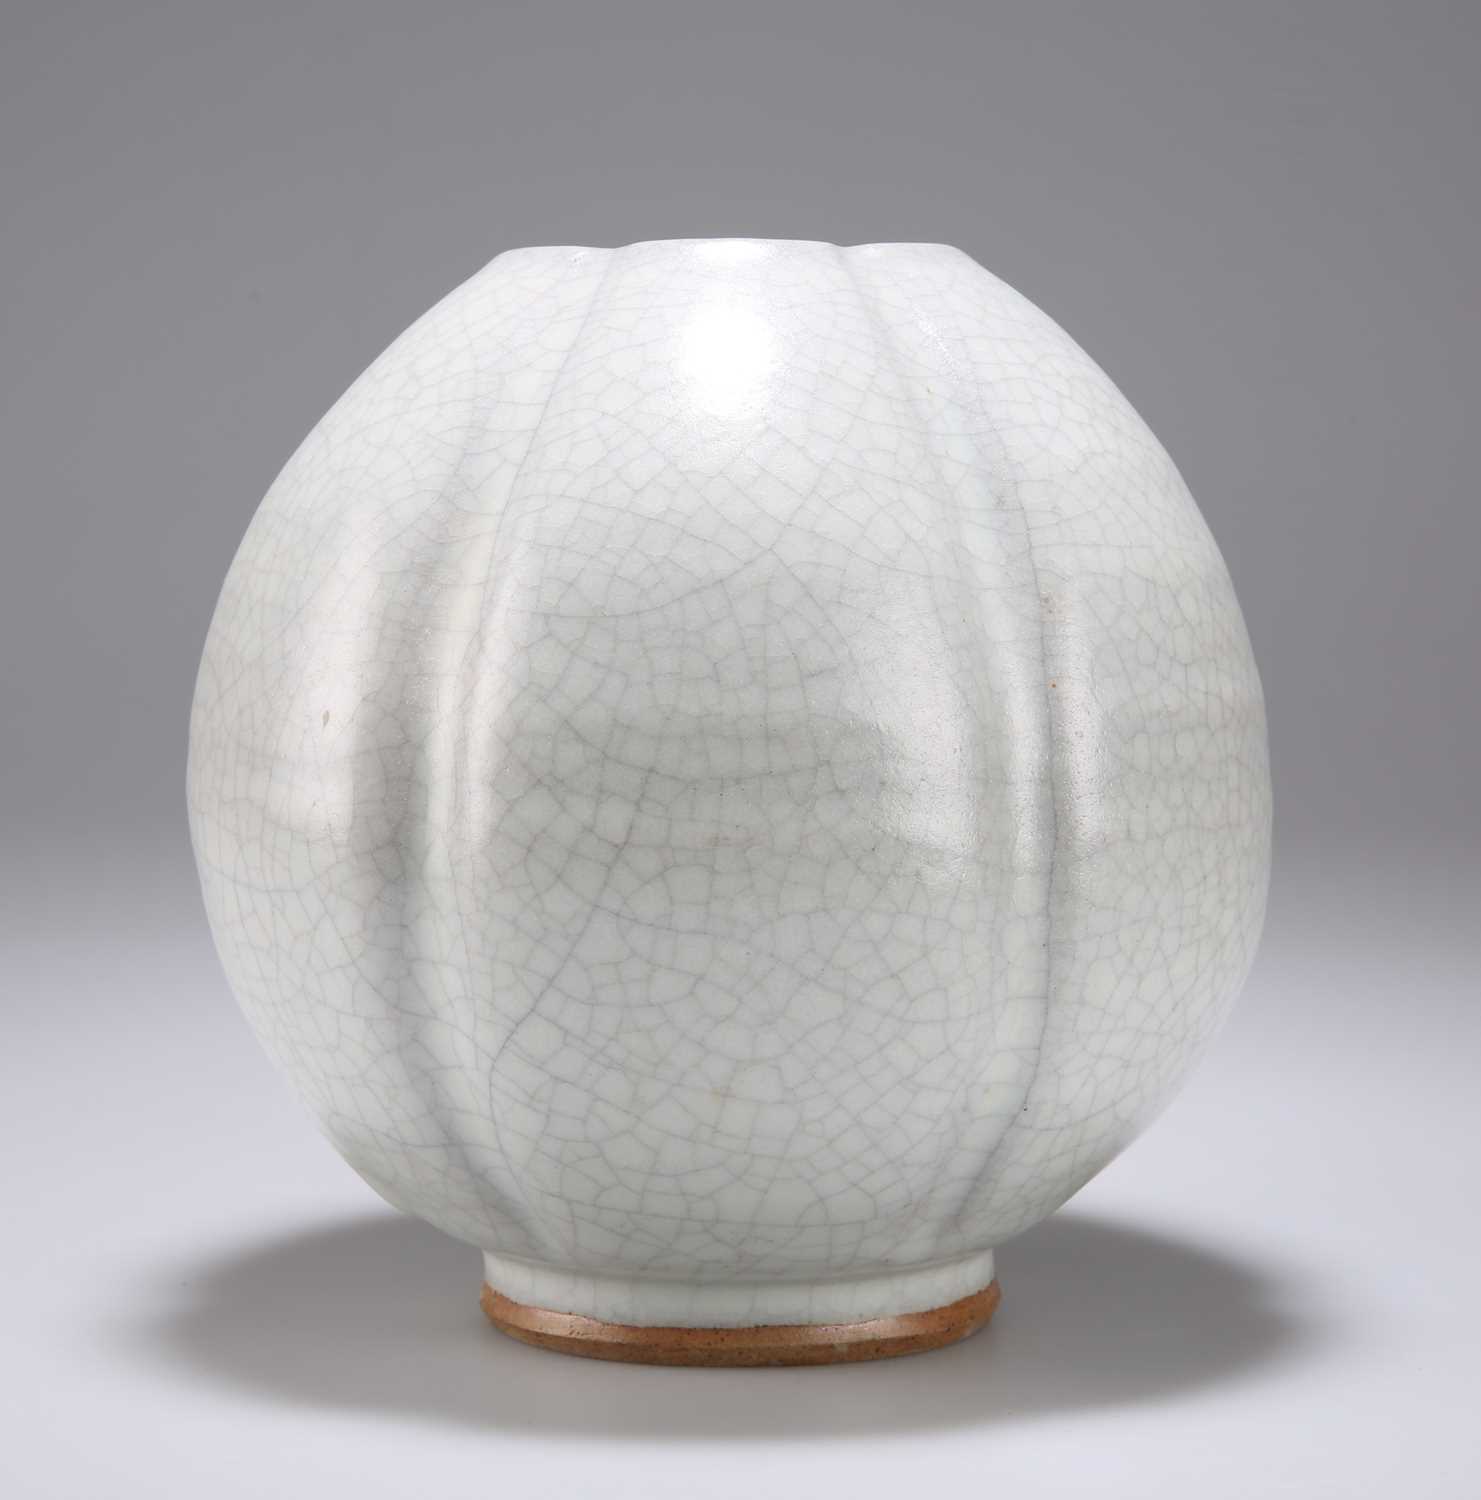 Lot 99 - CHARLES VYSE (1882-1971), A STONEWARE VASE, DATED 1938